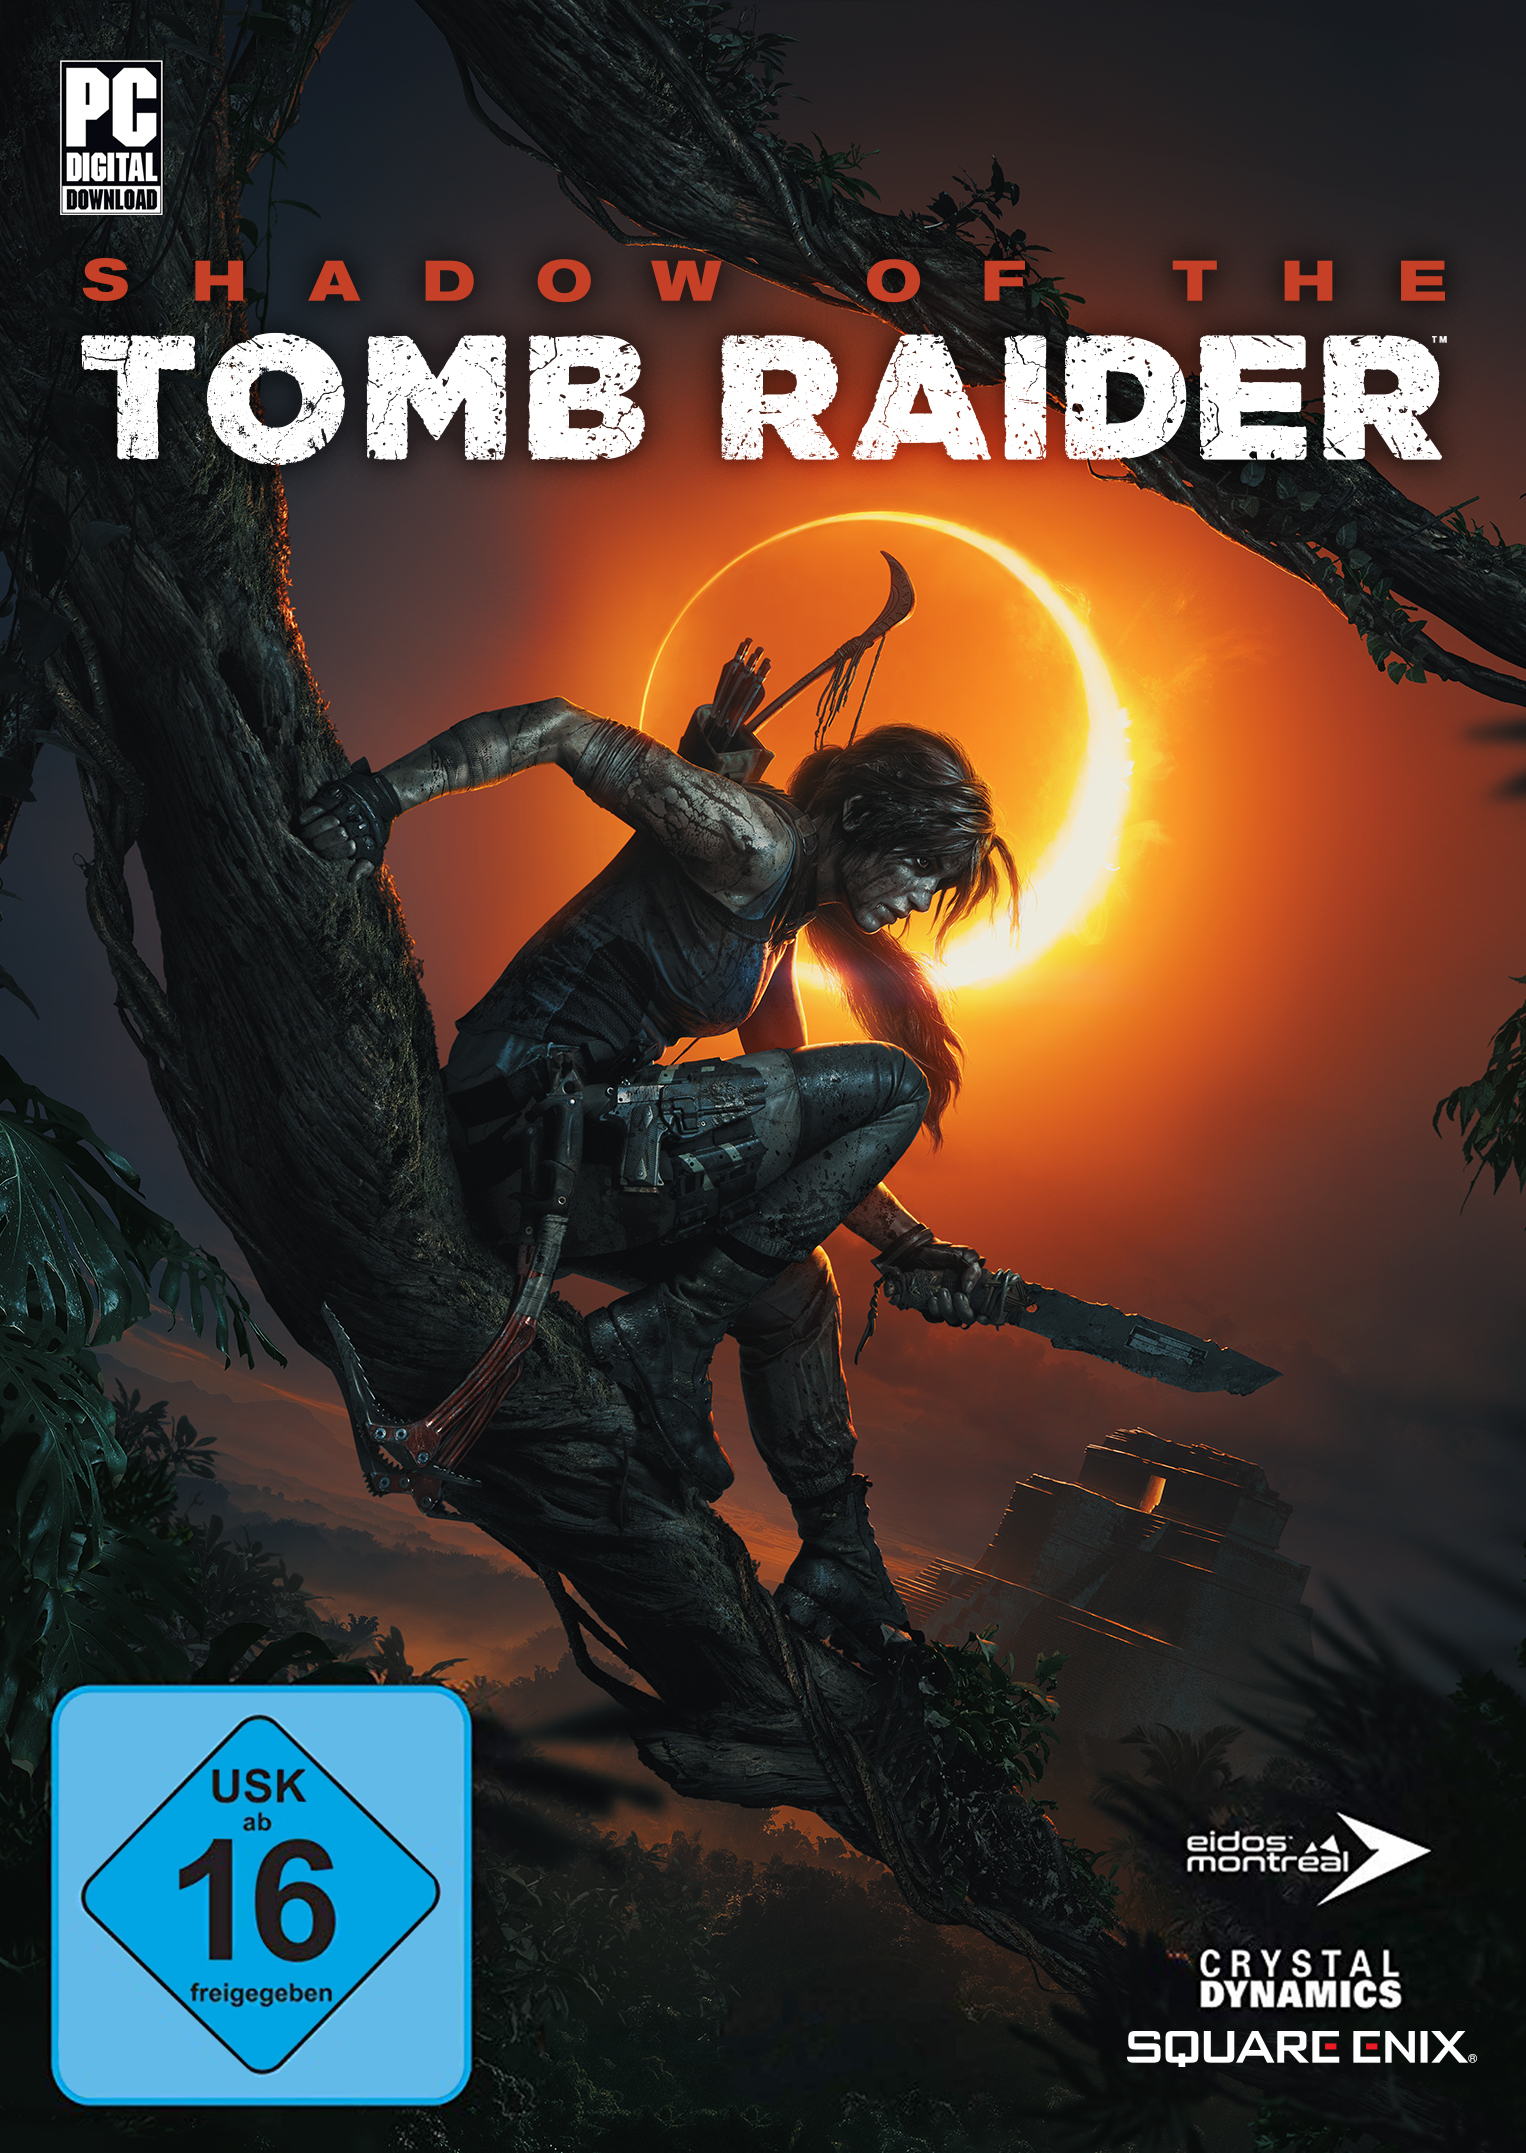 Tomb [Game Raider Shadow the - of Boy]